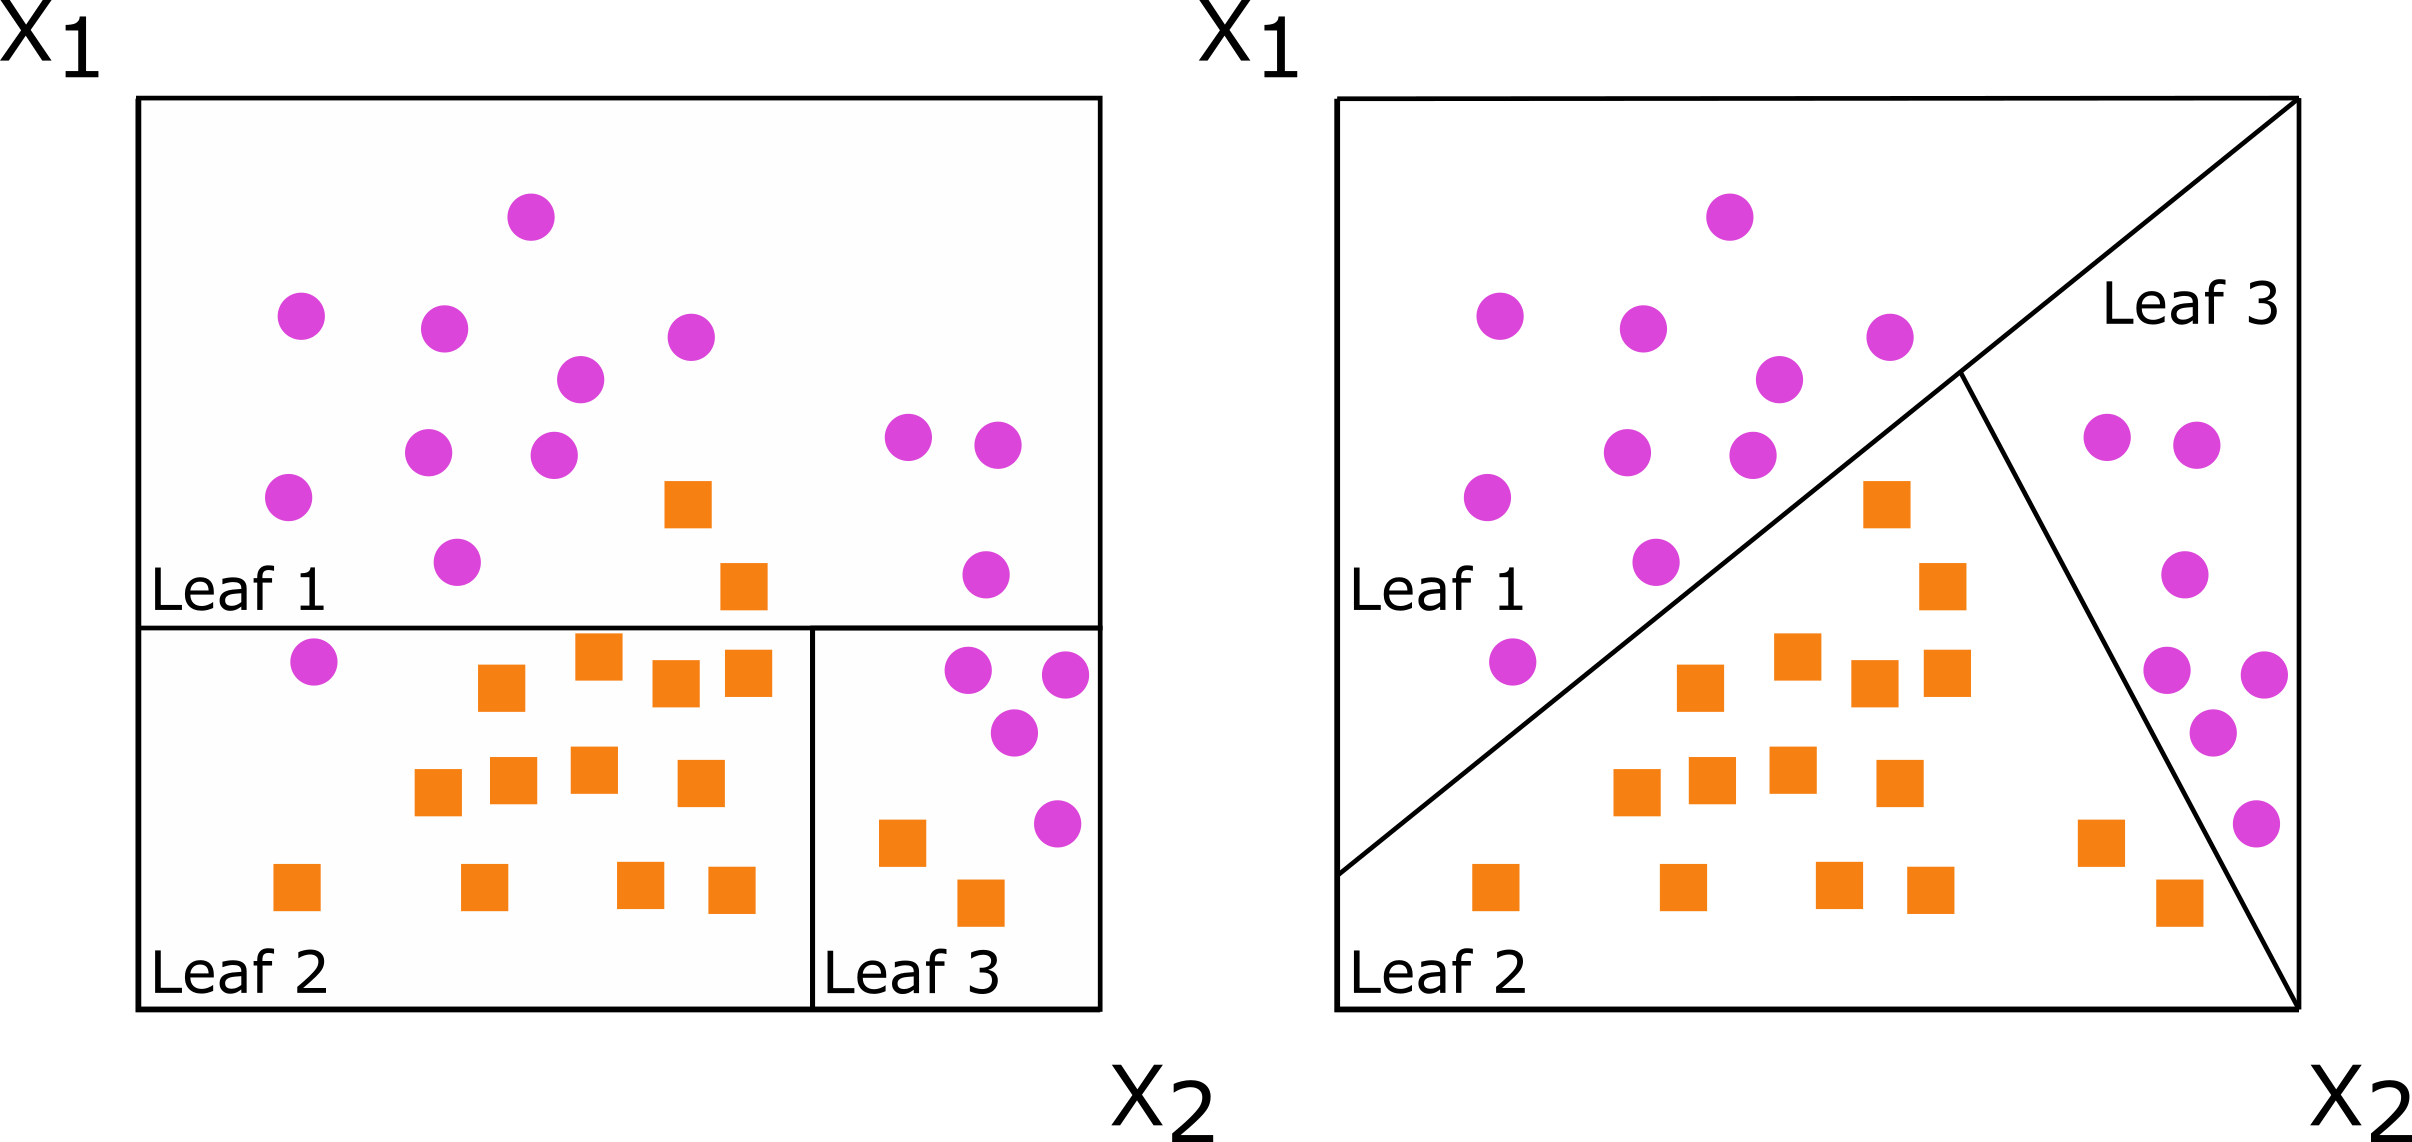 Two scatter plots of data with two predictors, X1 and X2, and two classes, coded as pink dots and orange squares. The lefthand plot shows the splits of an axis-based decision tree which are at a right angle to the axis. The resulting partition generally separates the classes well but not perfectly. The righthand plot shows the splits of an oblique tree which achieves perfect separation on this example because it can cut across the predictor space diagnonally.